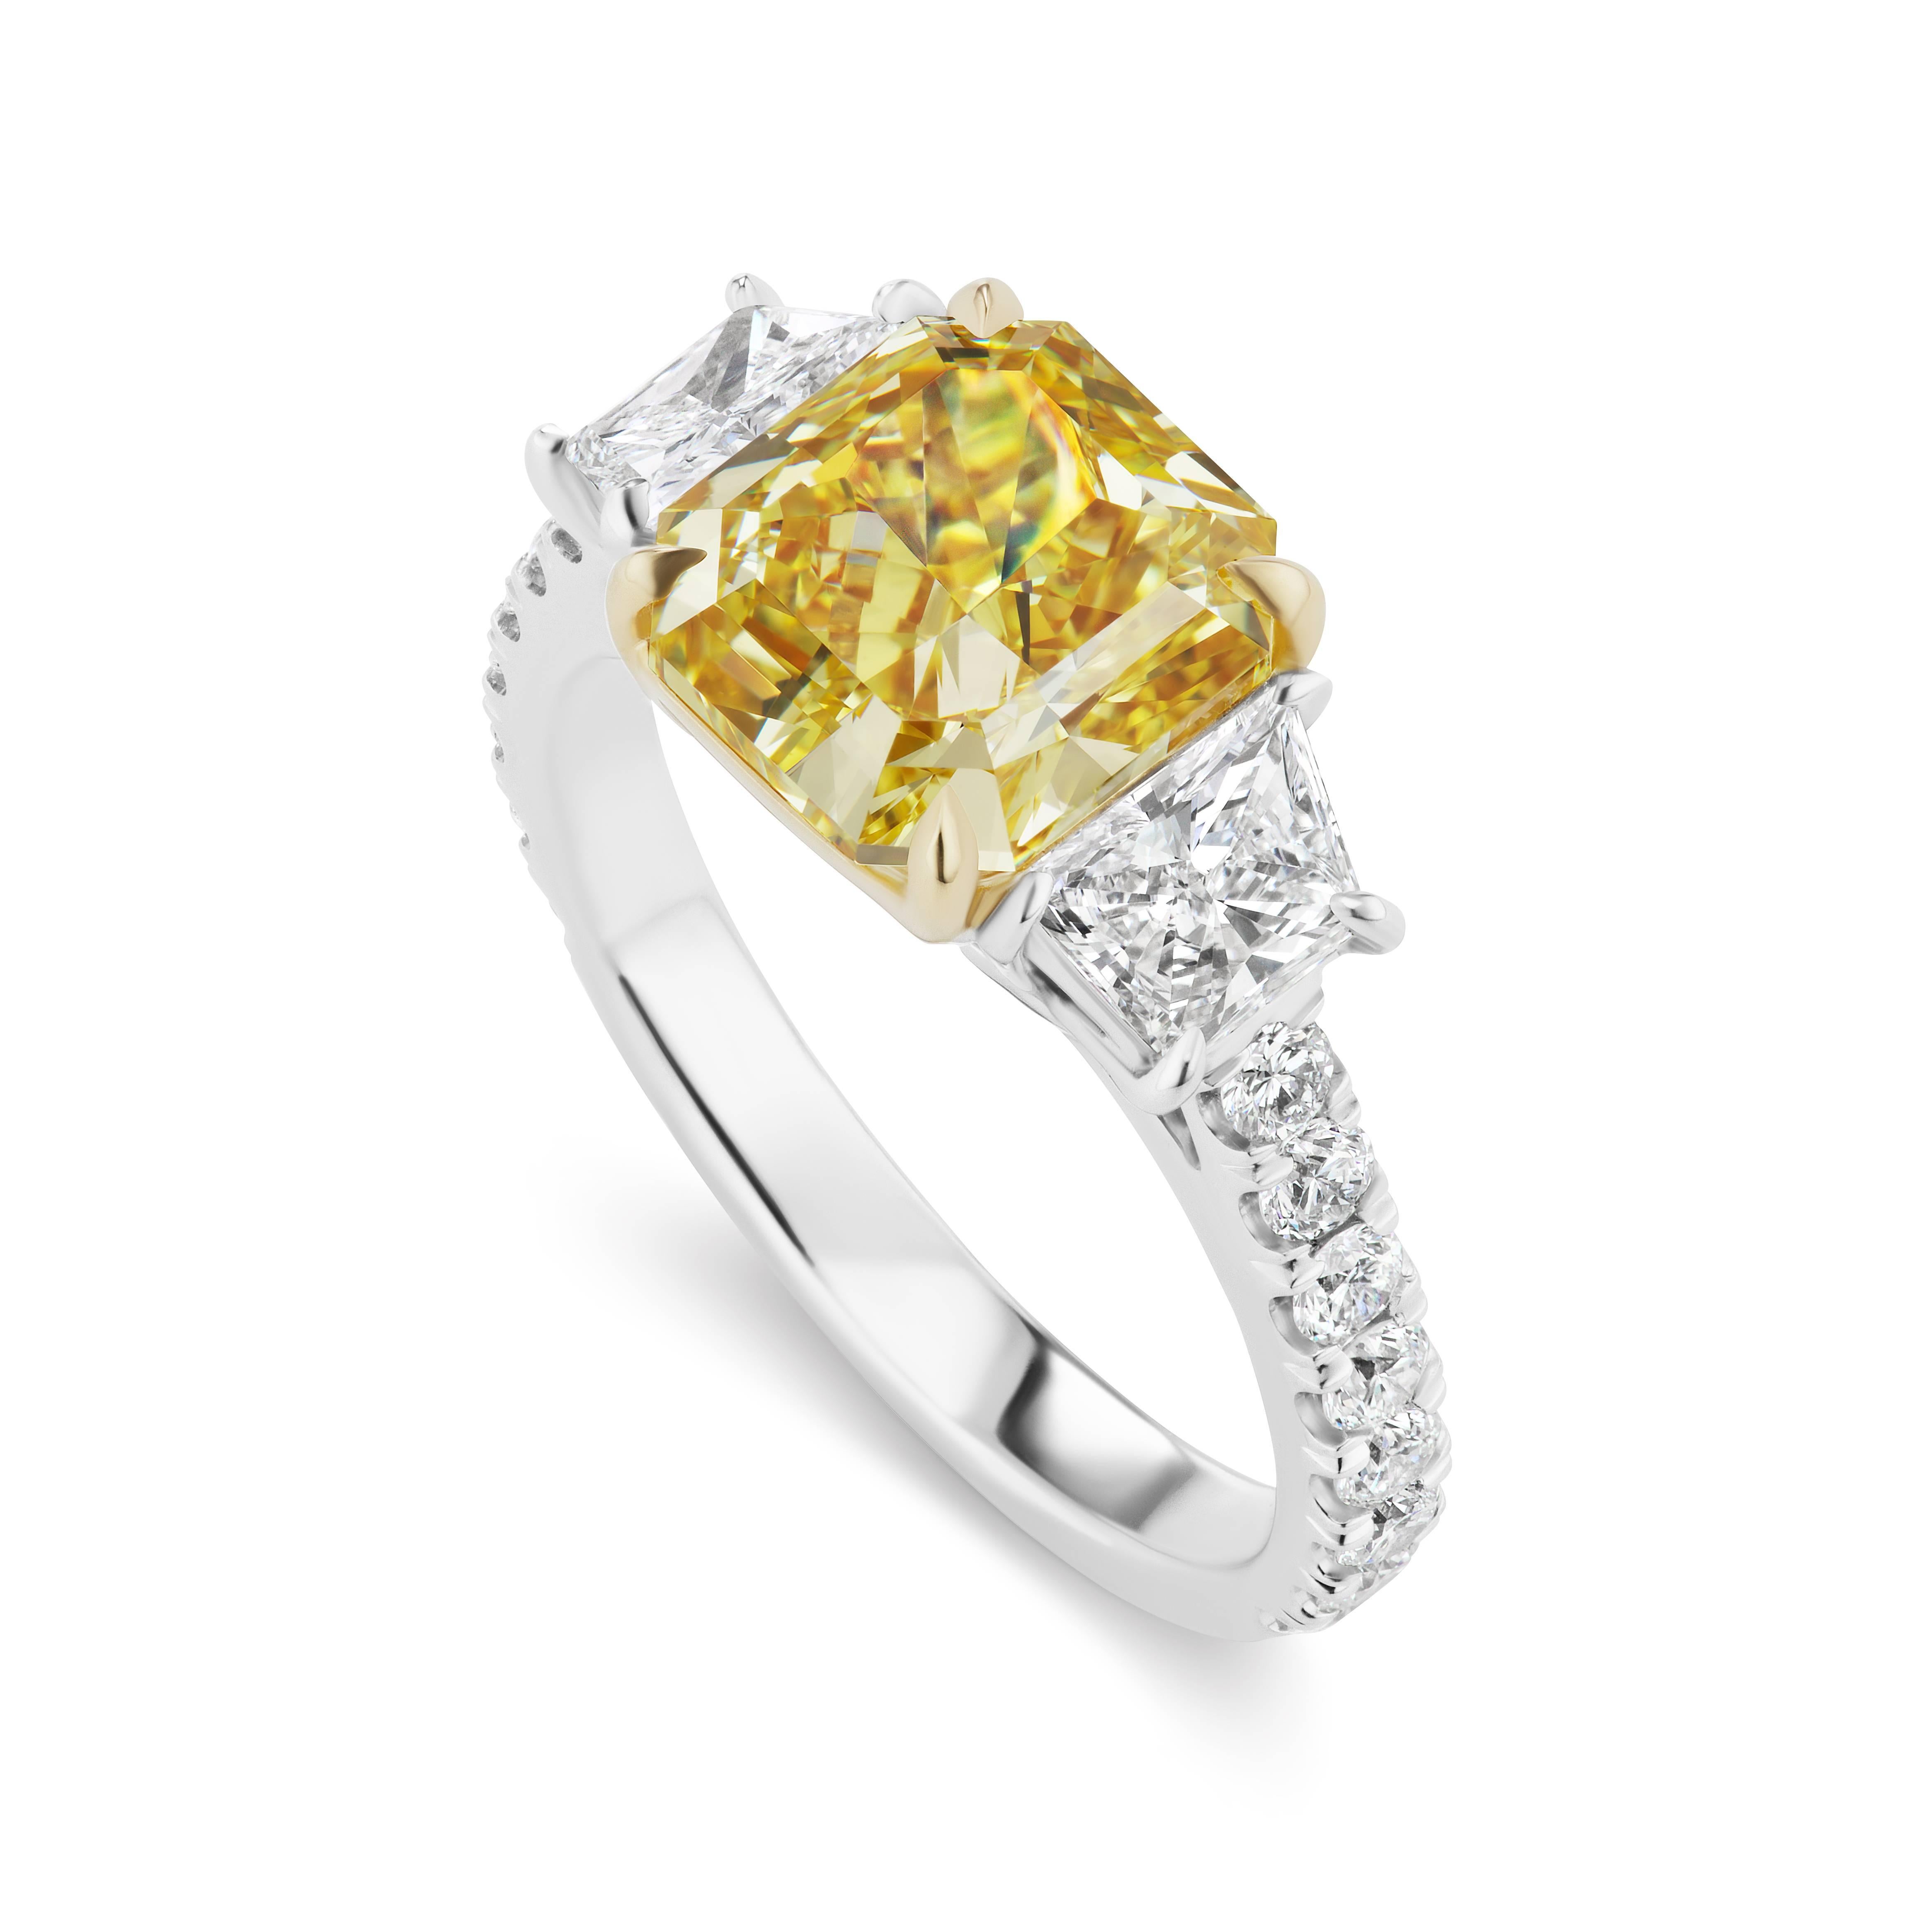 From the collection of Scarselli, this  exceptional 3.05 carat Radiant Cut Natural Fancy vivid Yellow diamond is  VS2 clarity.  From the Scarselli Classics grouping, this diamond may be ordered with a custom mounting and is mounted here with .73